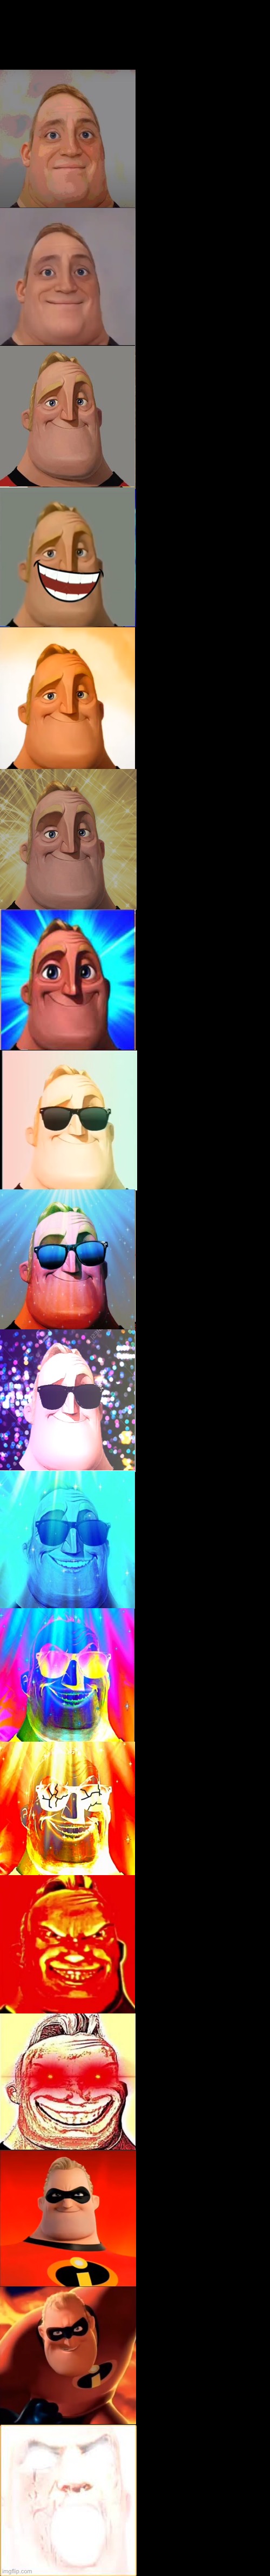 Mr incredible becoming canny extended Blank Meme Template